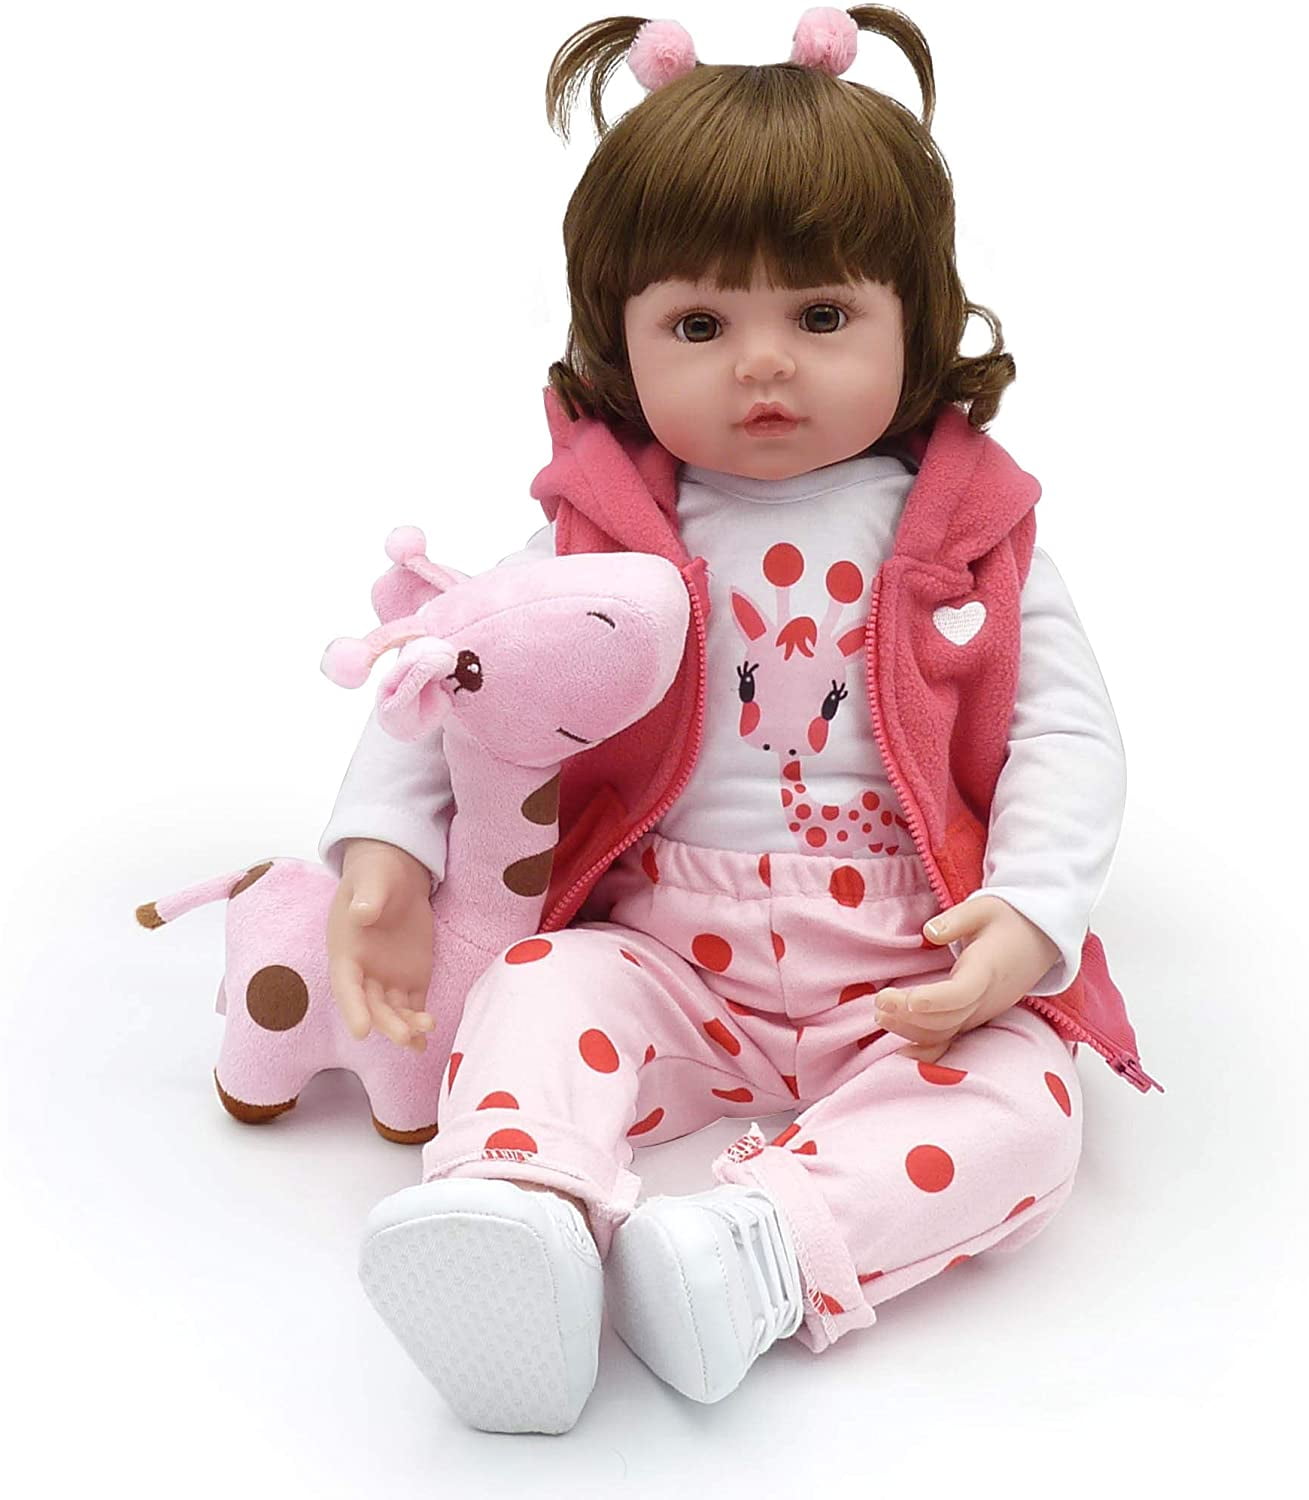 DOLLHOOD Reborn Baby Dolls - 18-Inch Lifelike Realistic Full Realistic  Vinyl Silicone Baby Doll with Movable Arms and Legs Complete with  Accessories